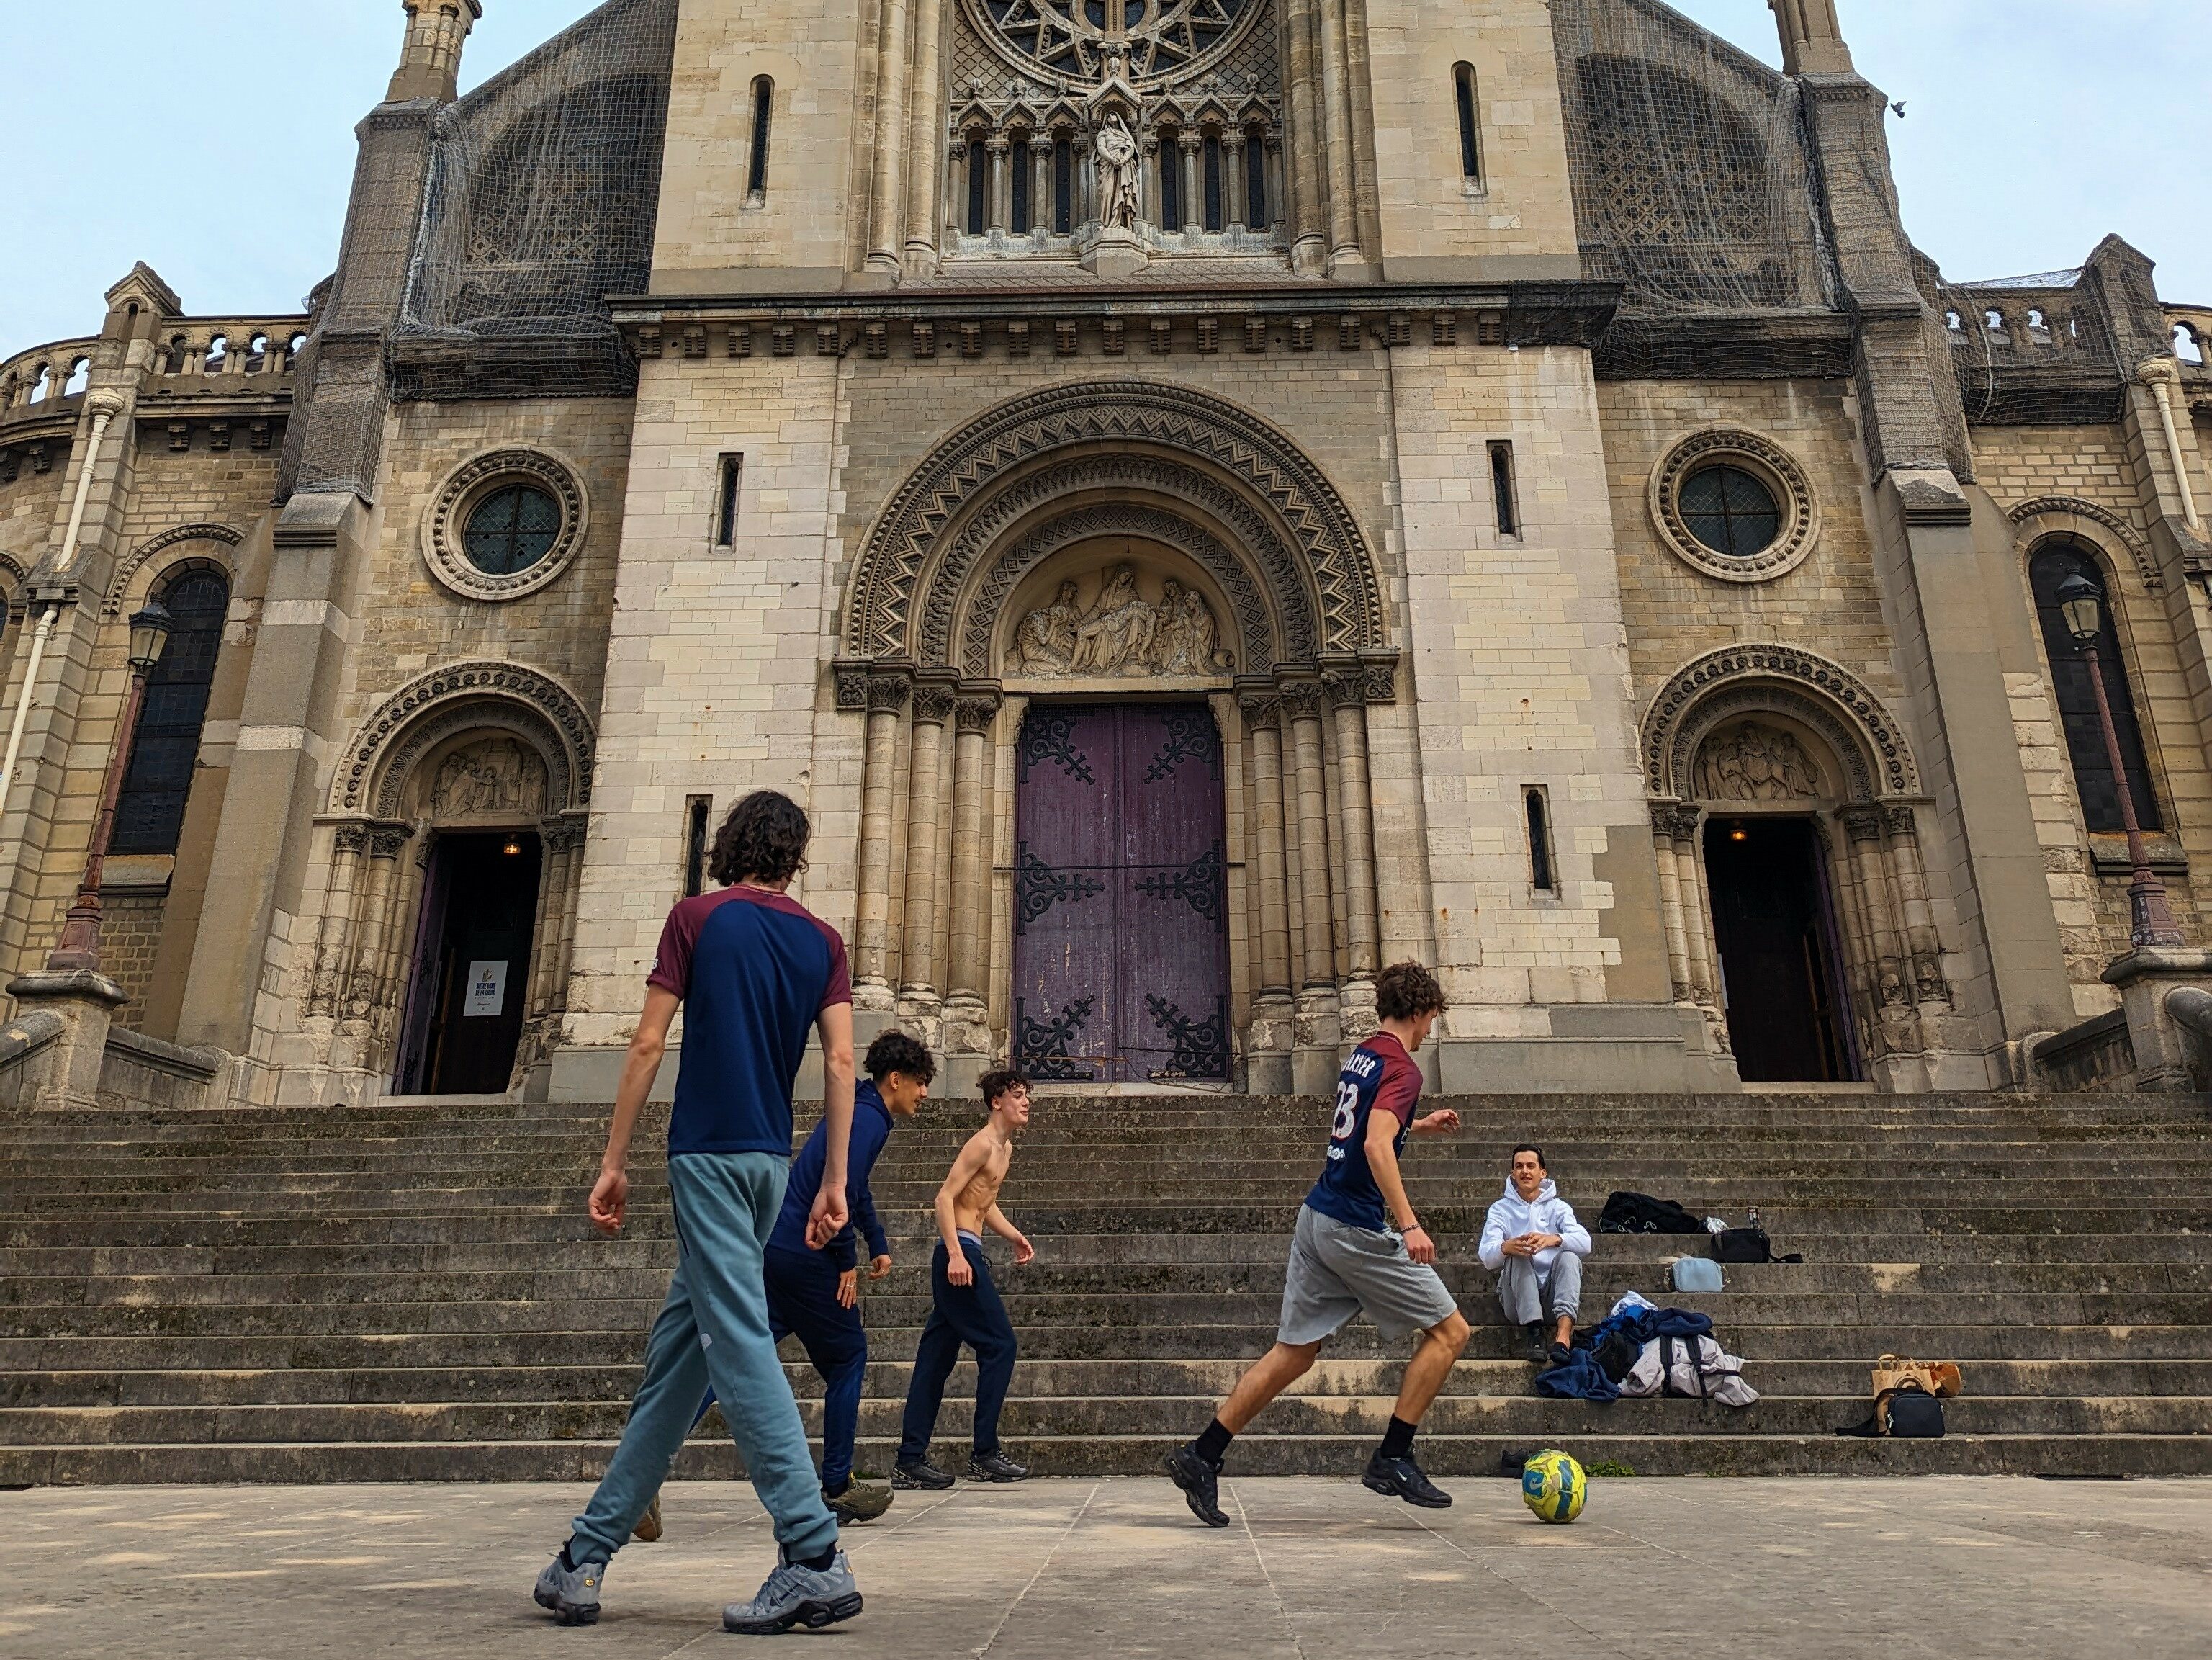 Five boys playing soccer in front of a church in the Ménilmontant district in the 20th arrondissement.